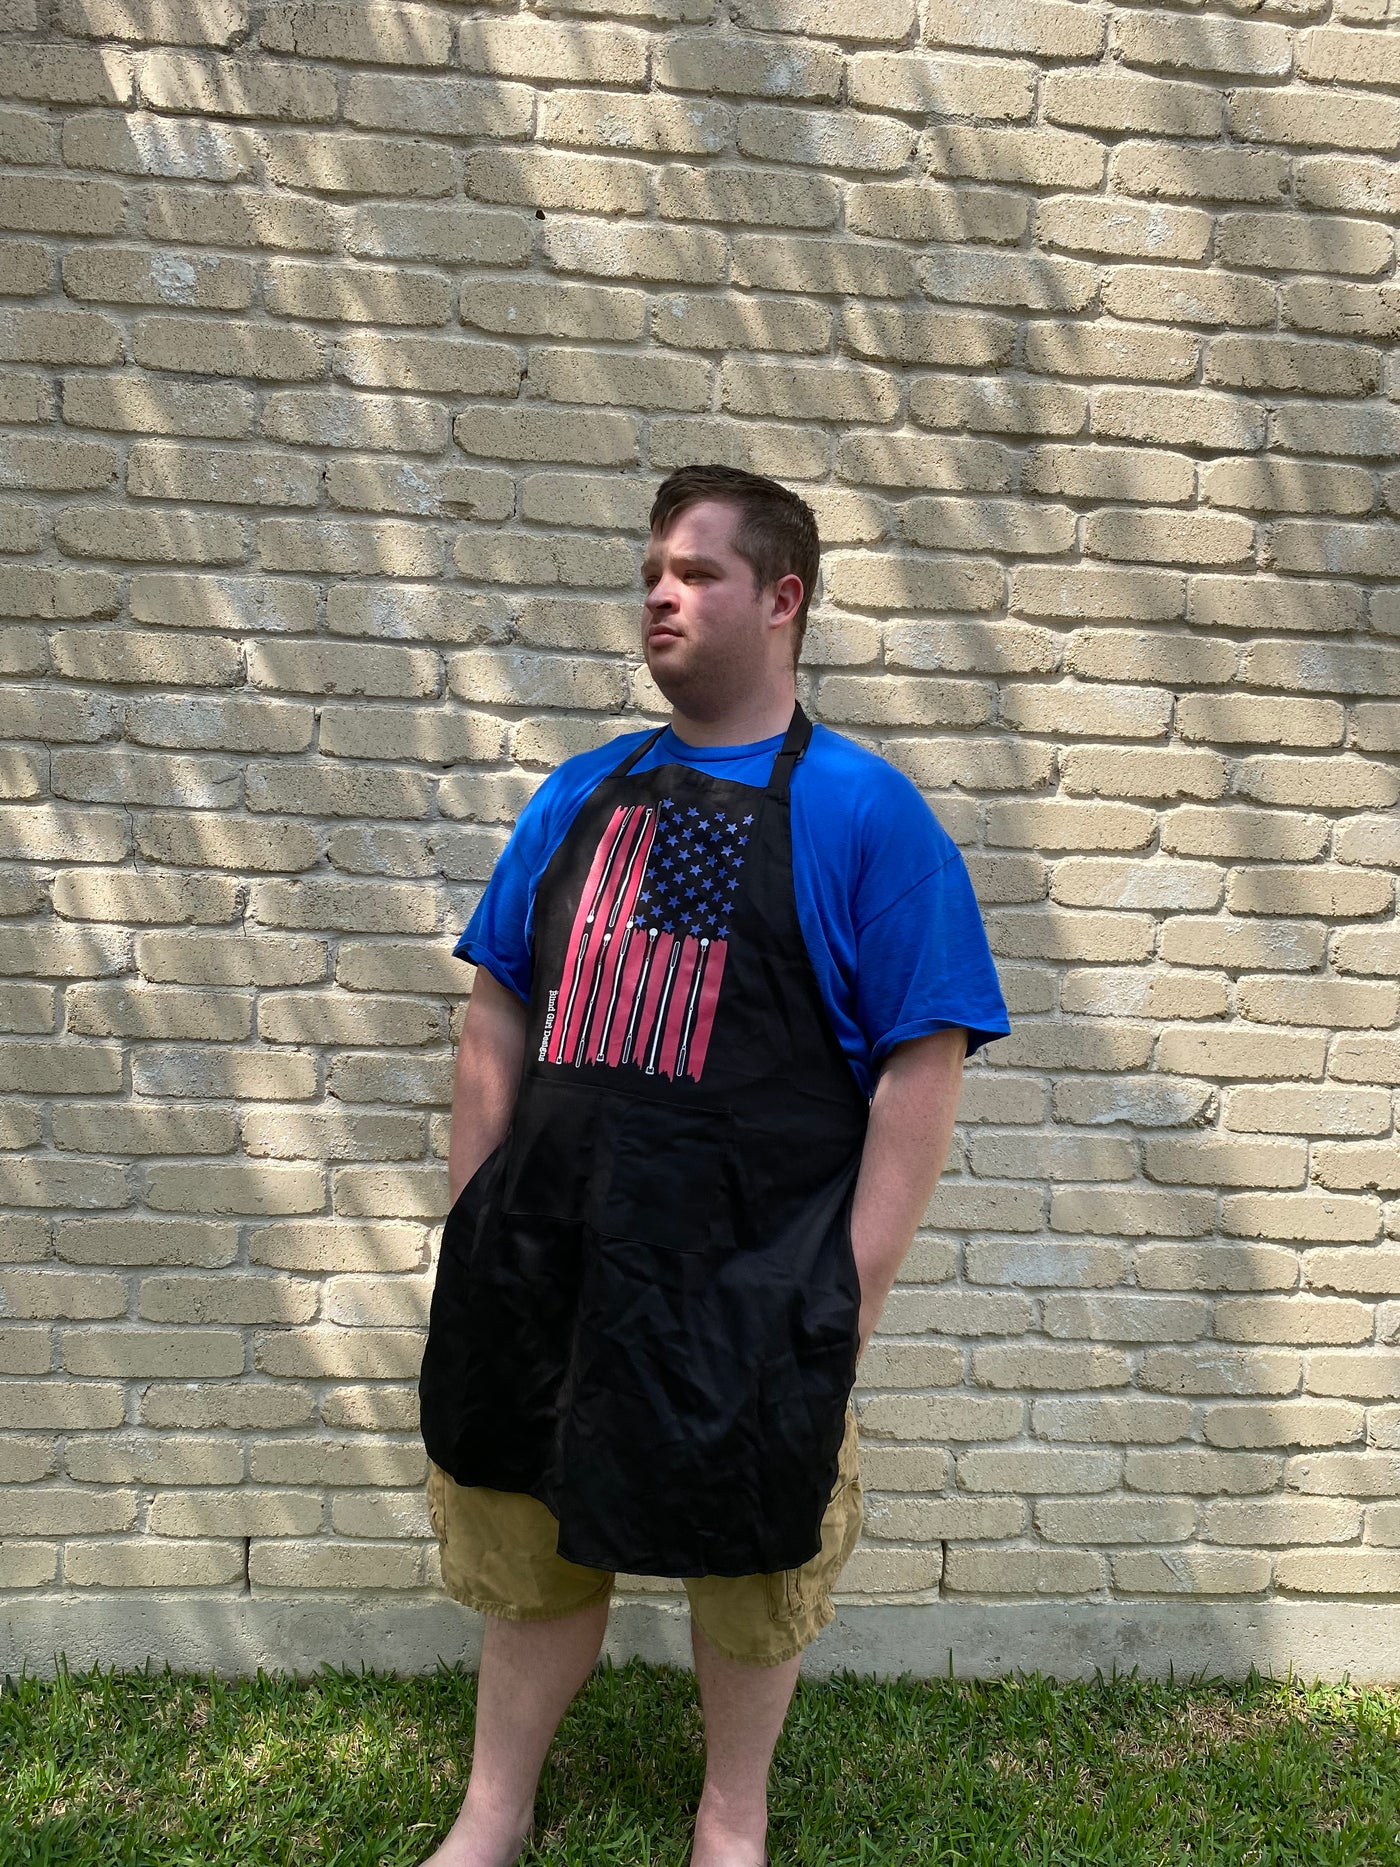 Robert, a tall white male, stands outside against a brick wall and wears a black apron with our American flag created by laying out a traditional American flag, the stars are blue, the stripes are red, but the white stripes are actually white canes.